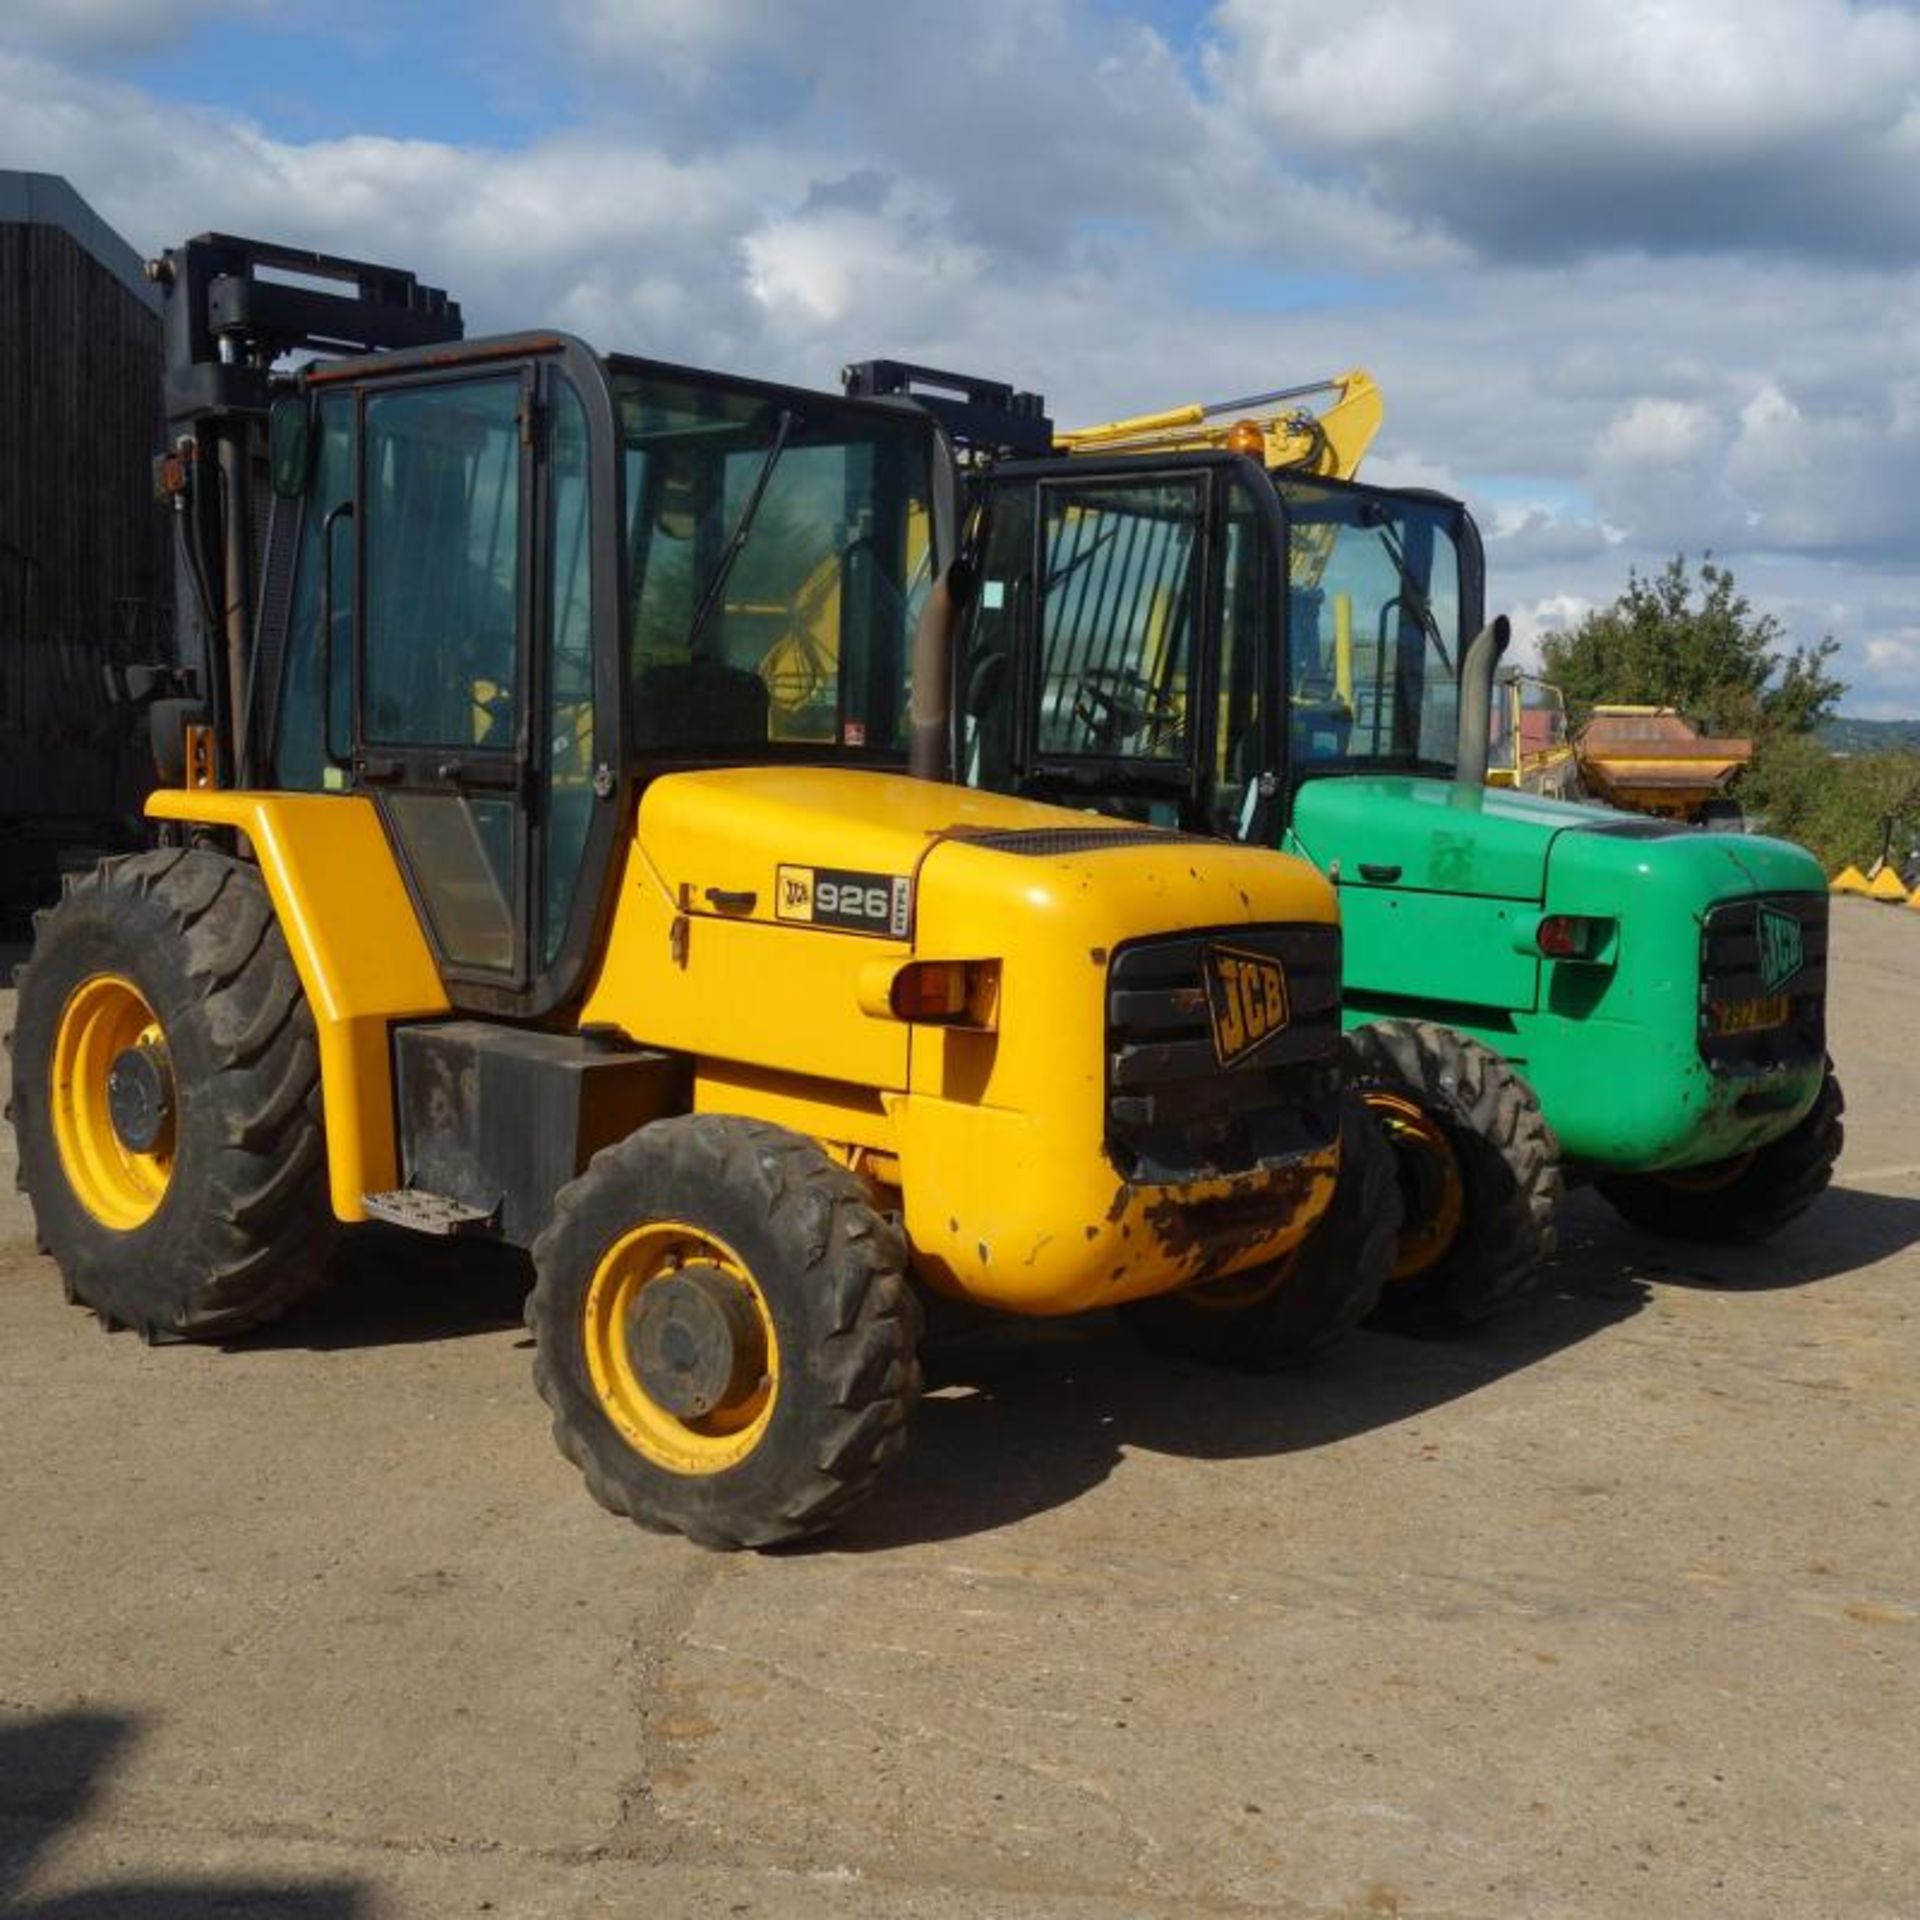 2008 JCB 926 4x4 Forklift (Yellow), 6884 Hours From New - Image 2 of 10